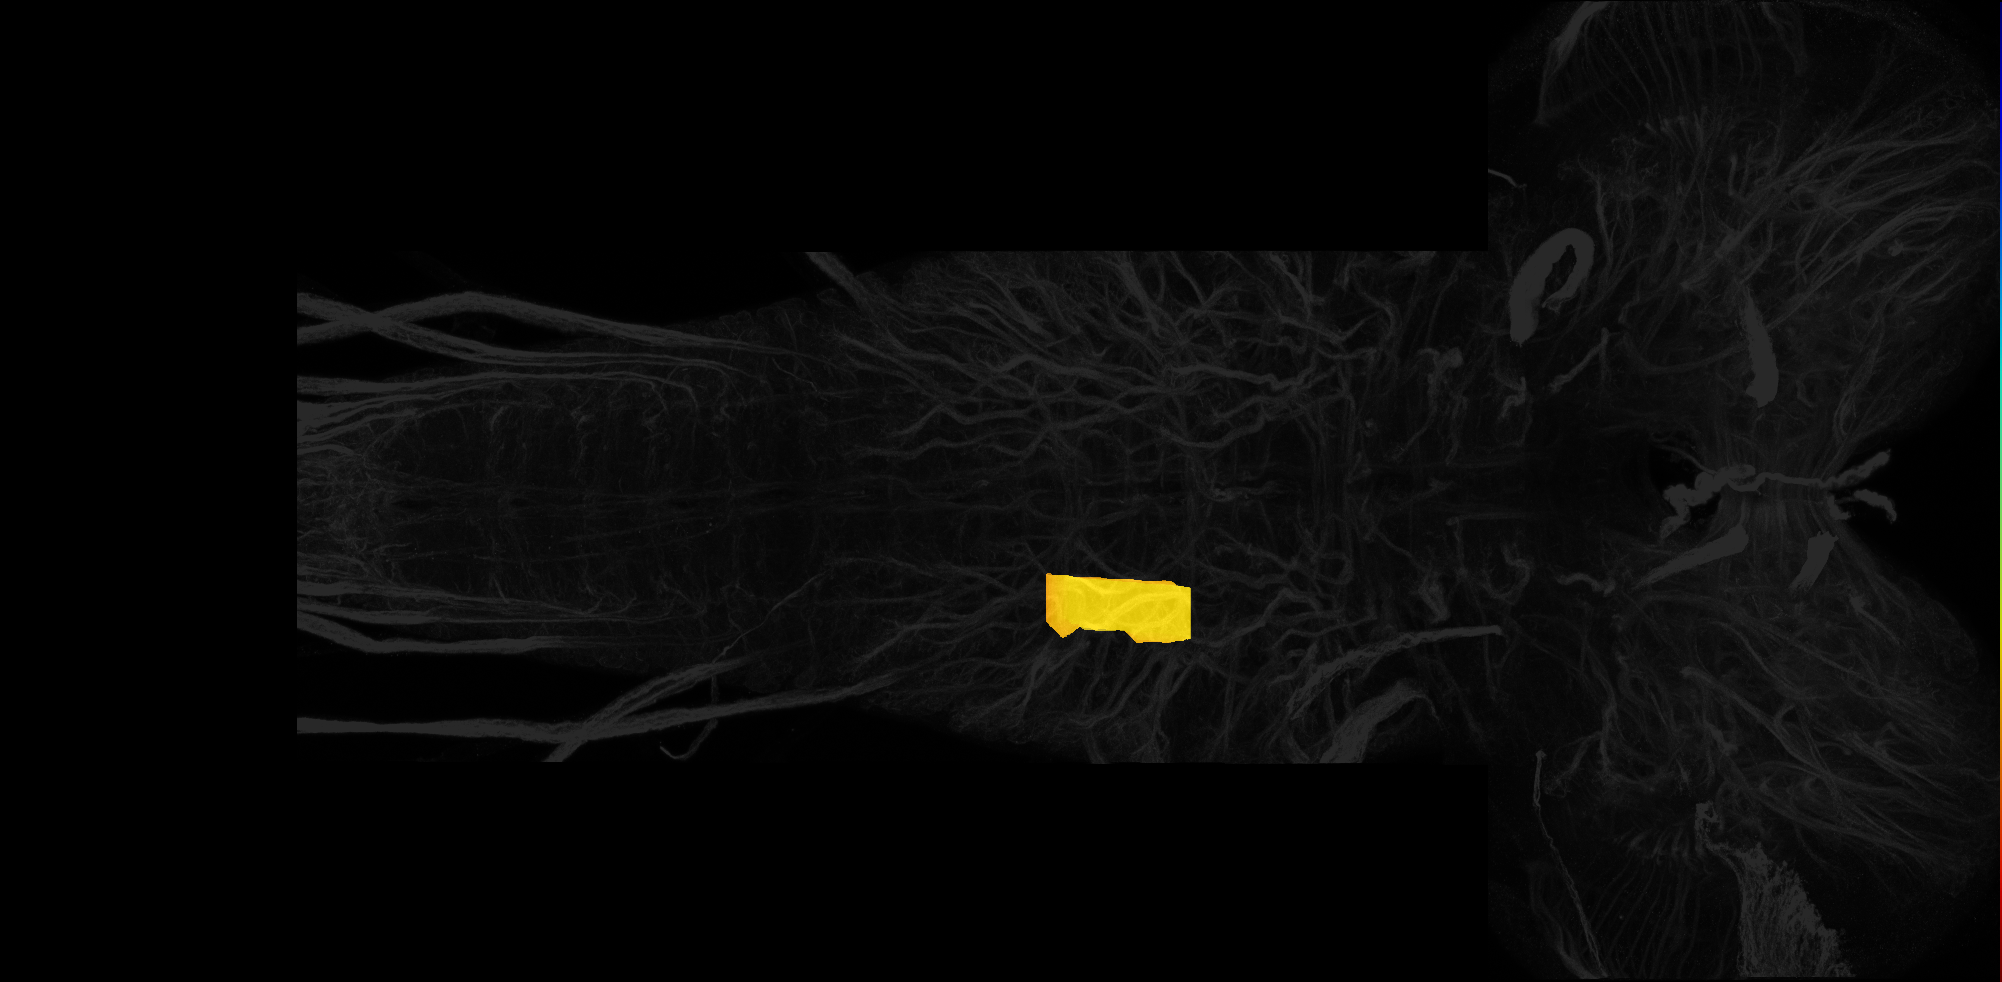 right centrolateral neuropil of T3 on L3 CNS template, Wood2018